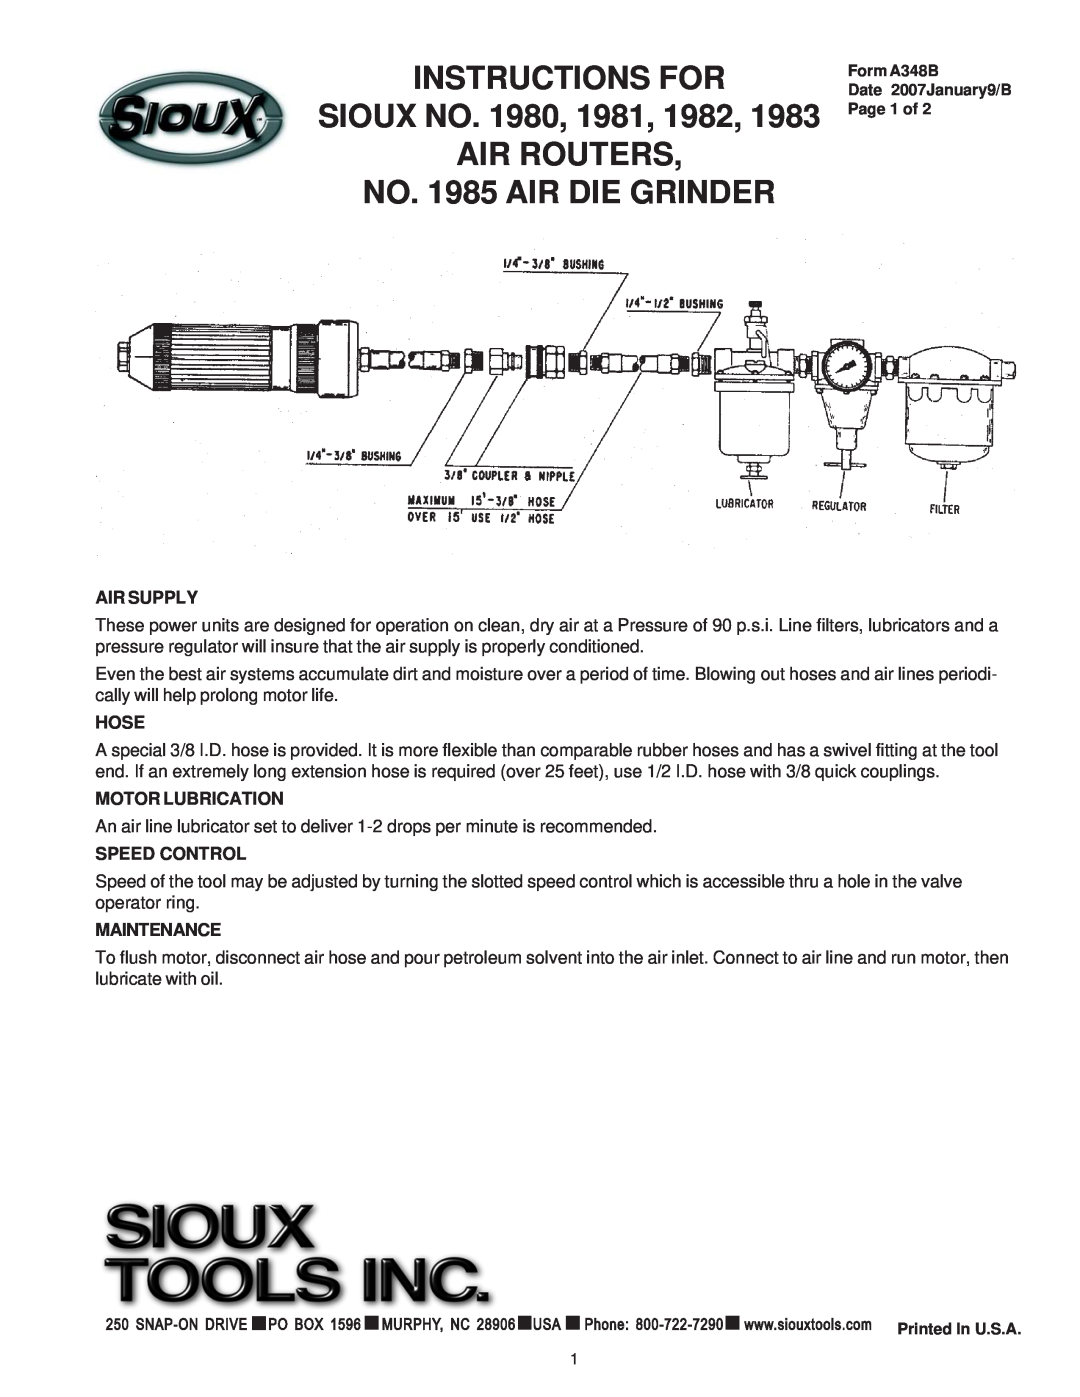 Sioux Tools manual INSTRUCTIONS FOR SIOUX NO. 1980, 1981, 1982 AIR ROUTERS, NO. 1985 AIR DIE GRINDER, Air Supply, Hose 